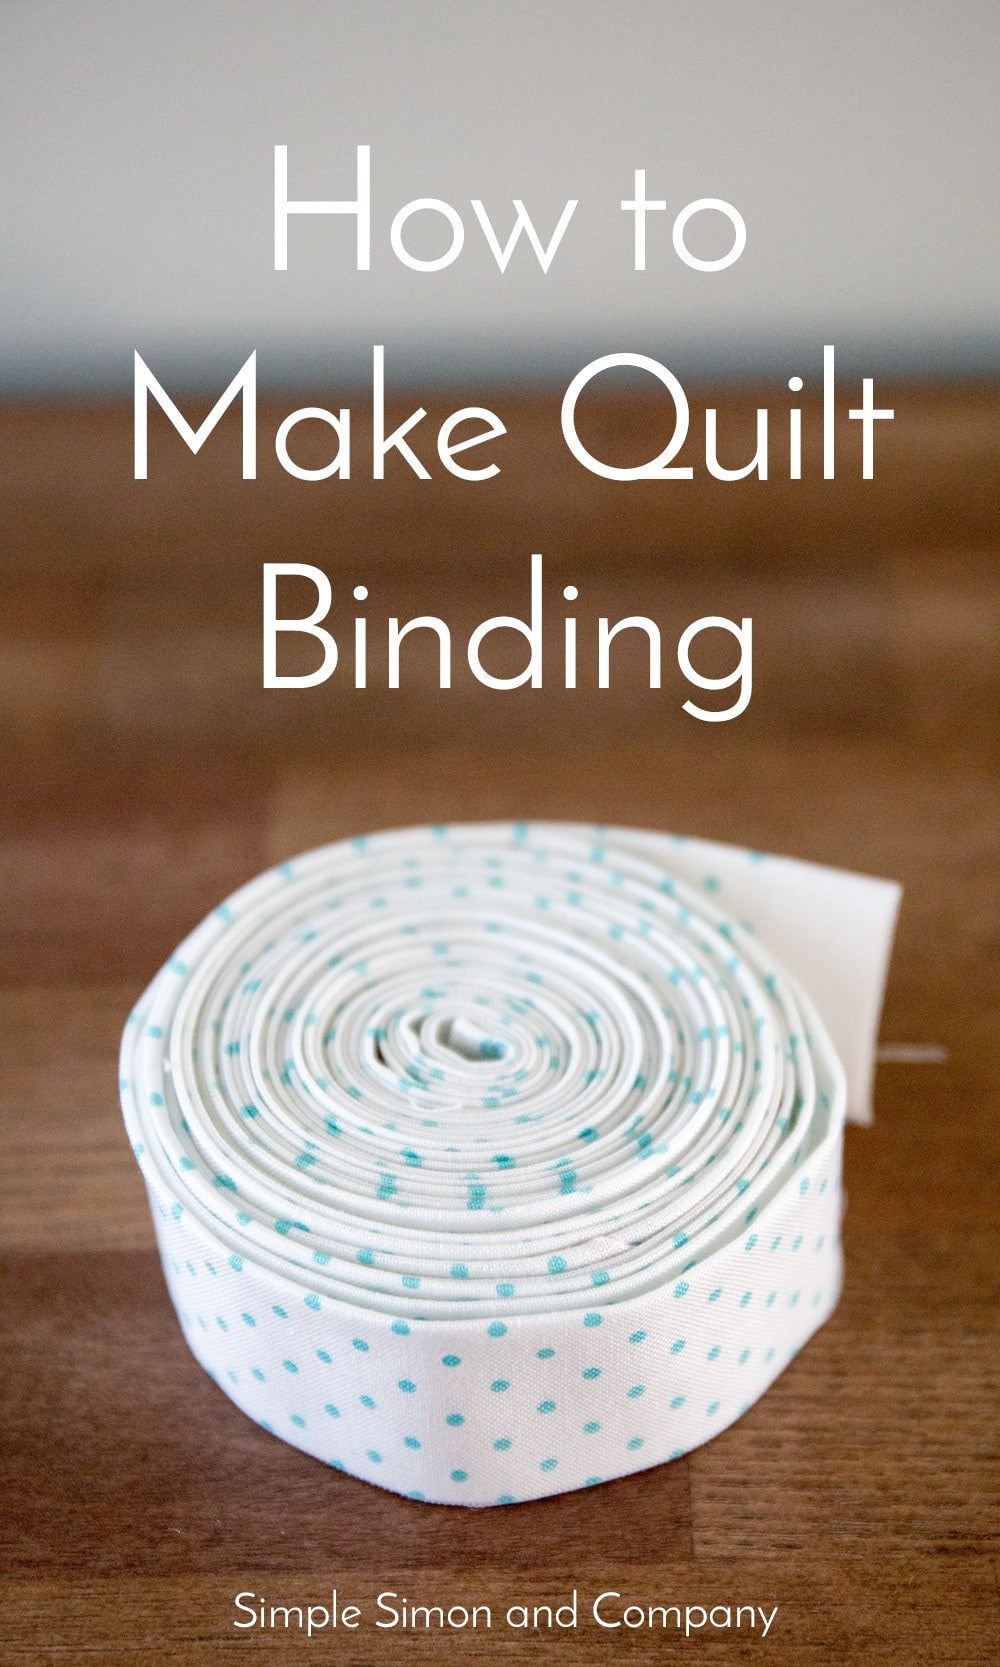 How to Make Quilt Binding